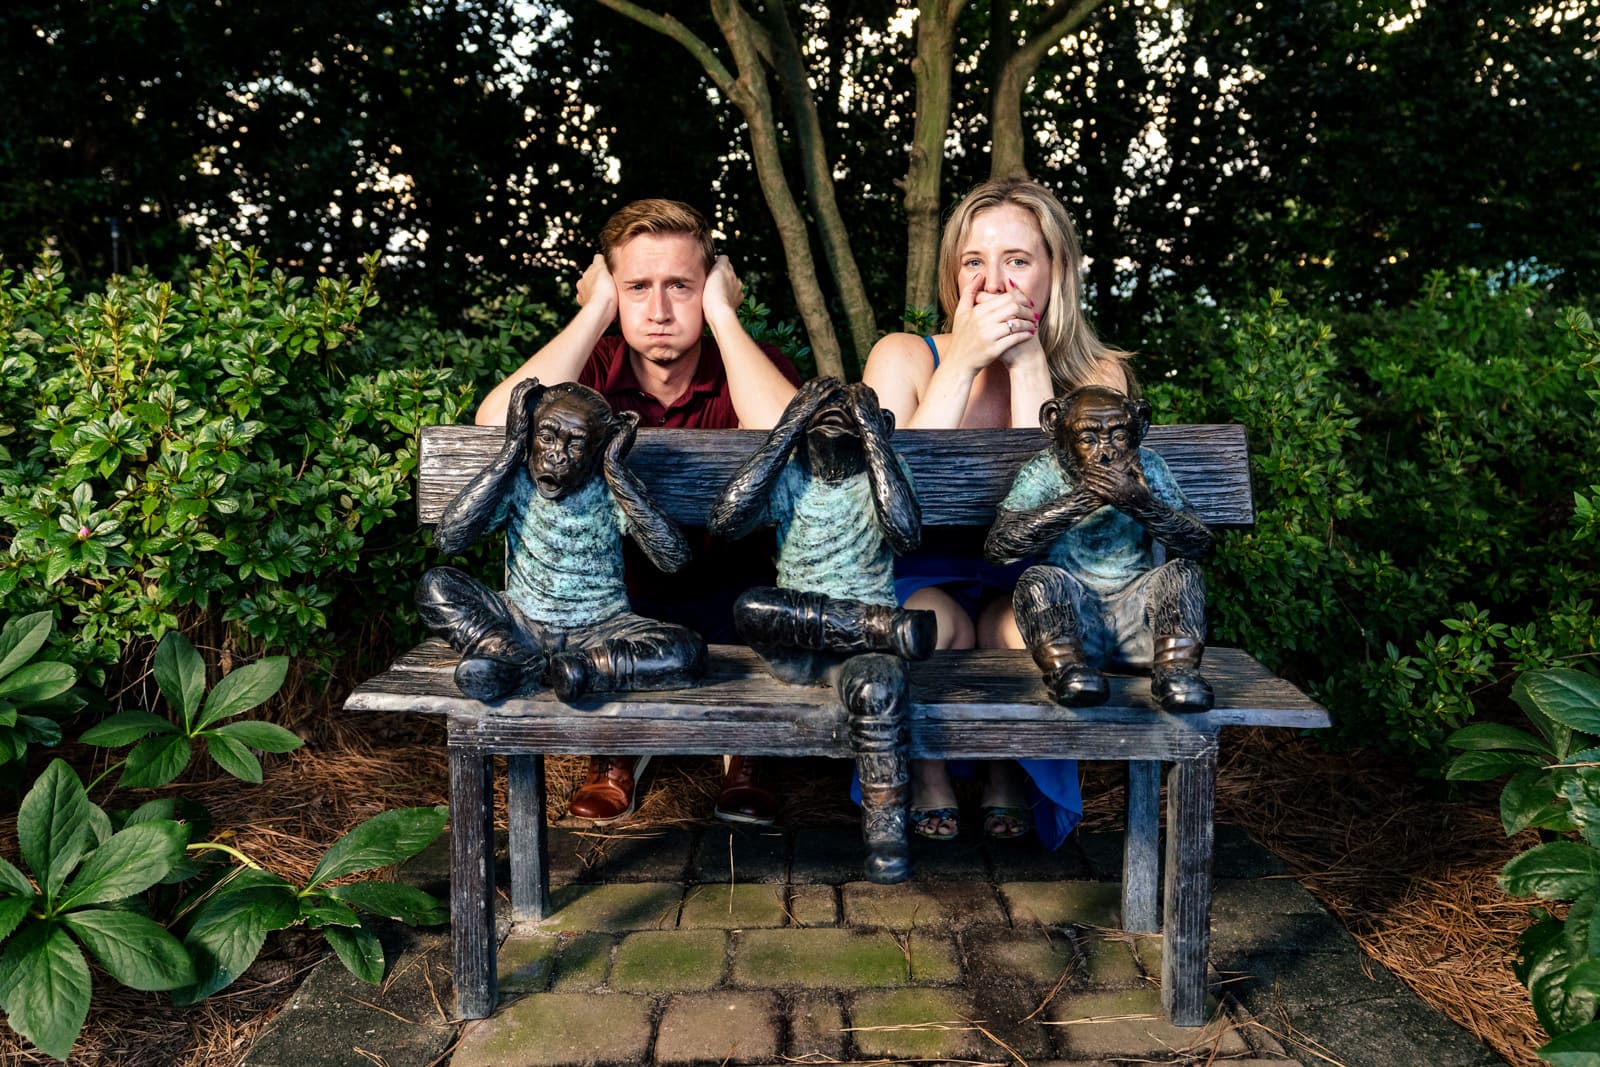 an engaged couple poses behind a sculpture of monkeys on a bench doing the "hear no evil, see no evil, speak no evil pose" creative engagement photography at Killjoy Cocktail bar in Raleigh, NC | photos by Kivus & Camera